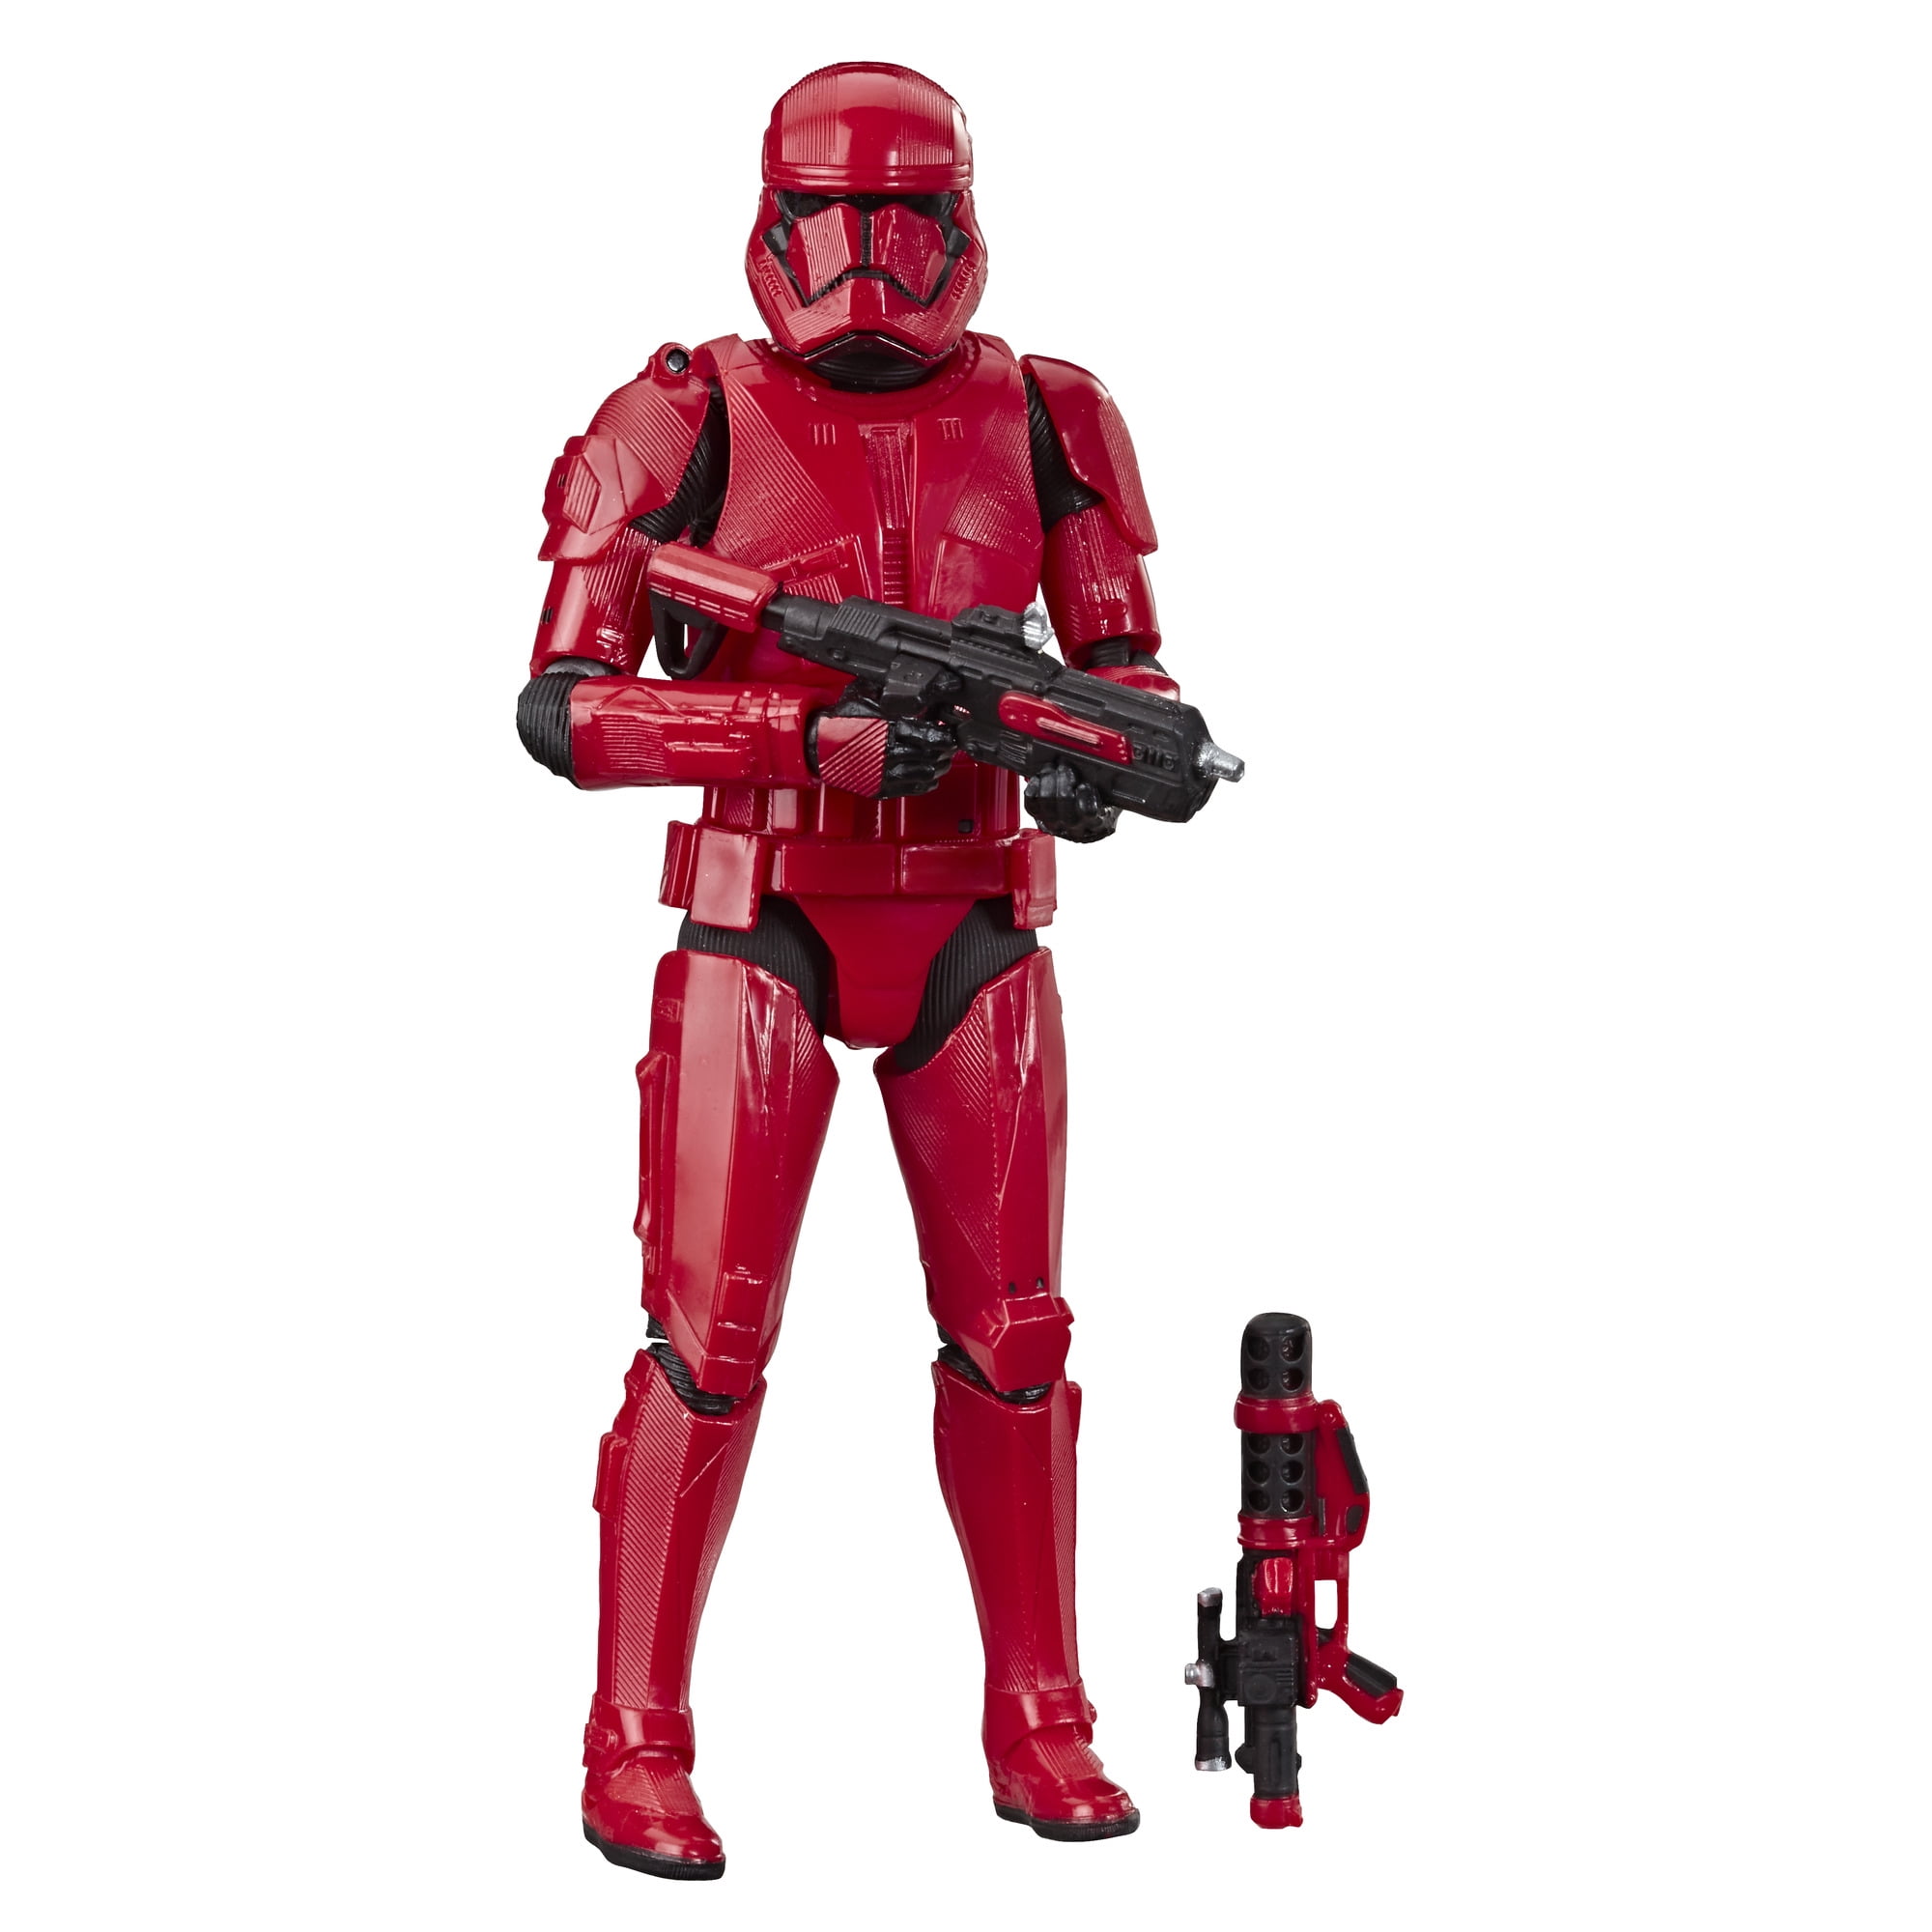 SDCC 2019 EXCLUSIVE Hasbro The Black Series Sith Trooper IN HAND 